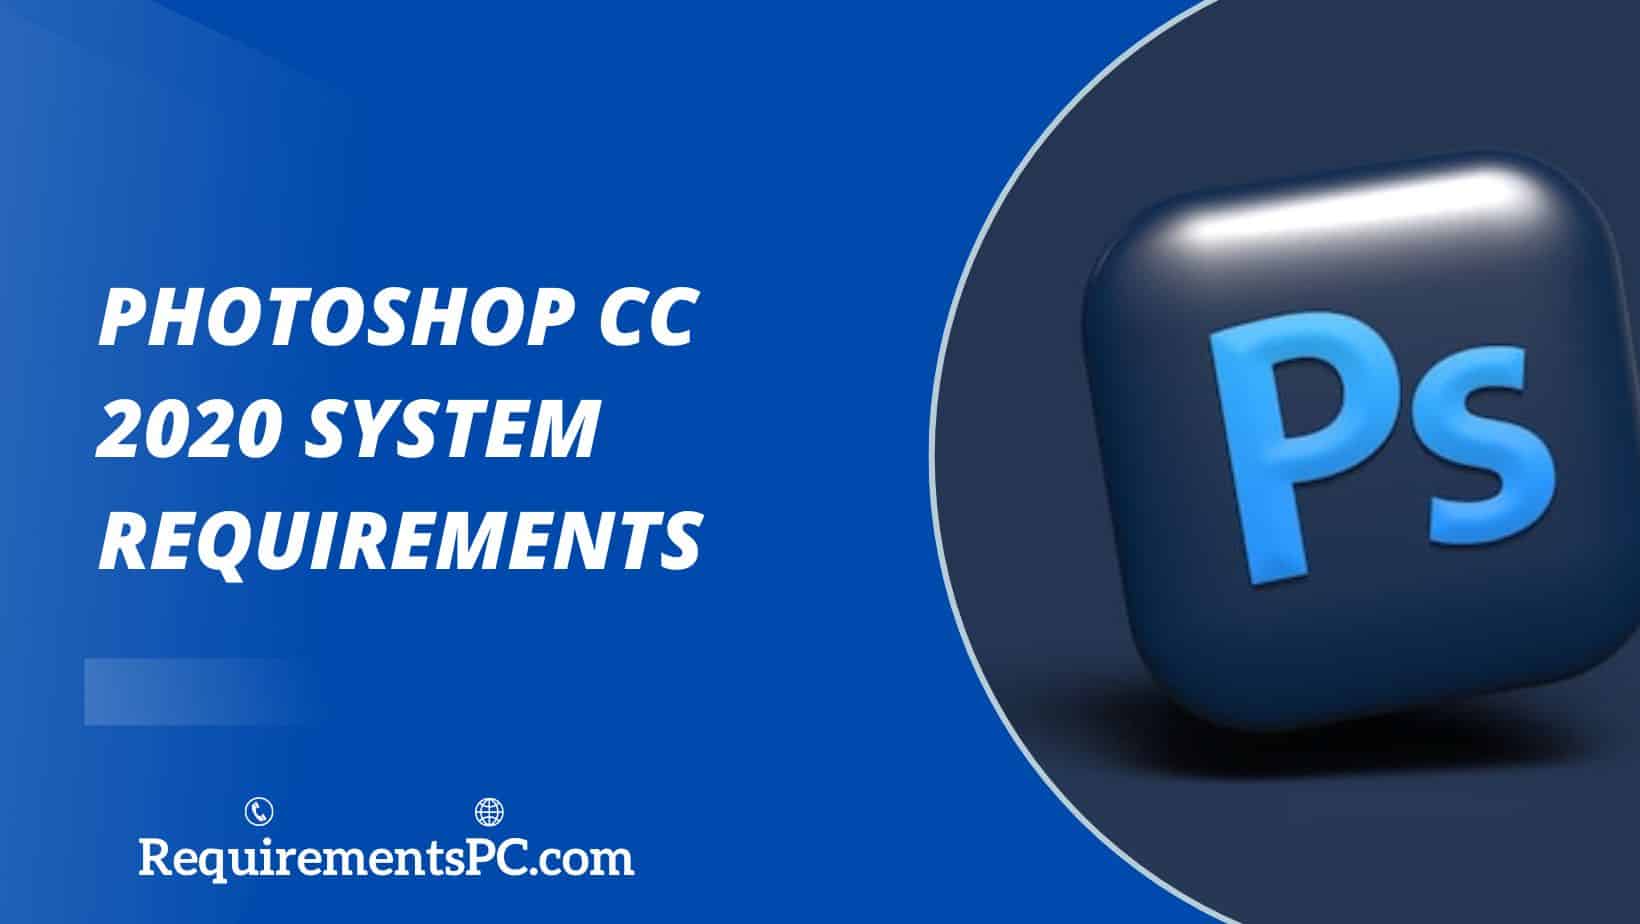 You are currently viewing Photoshop CC 2020 System Requirements